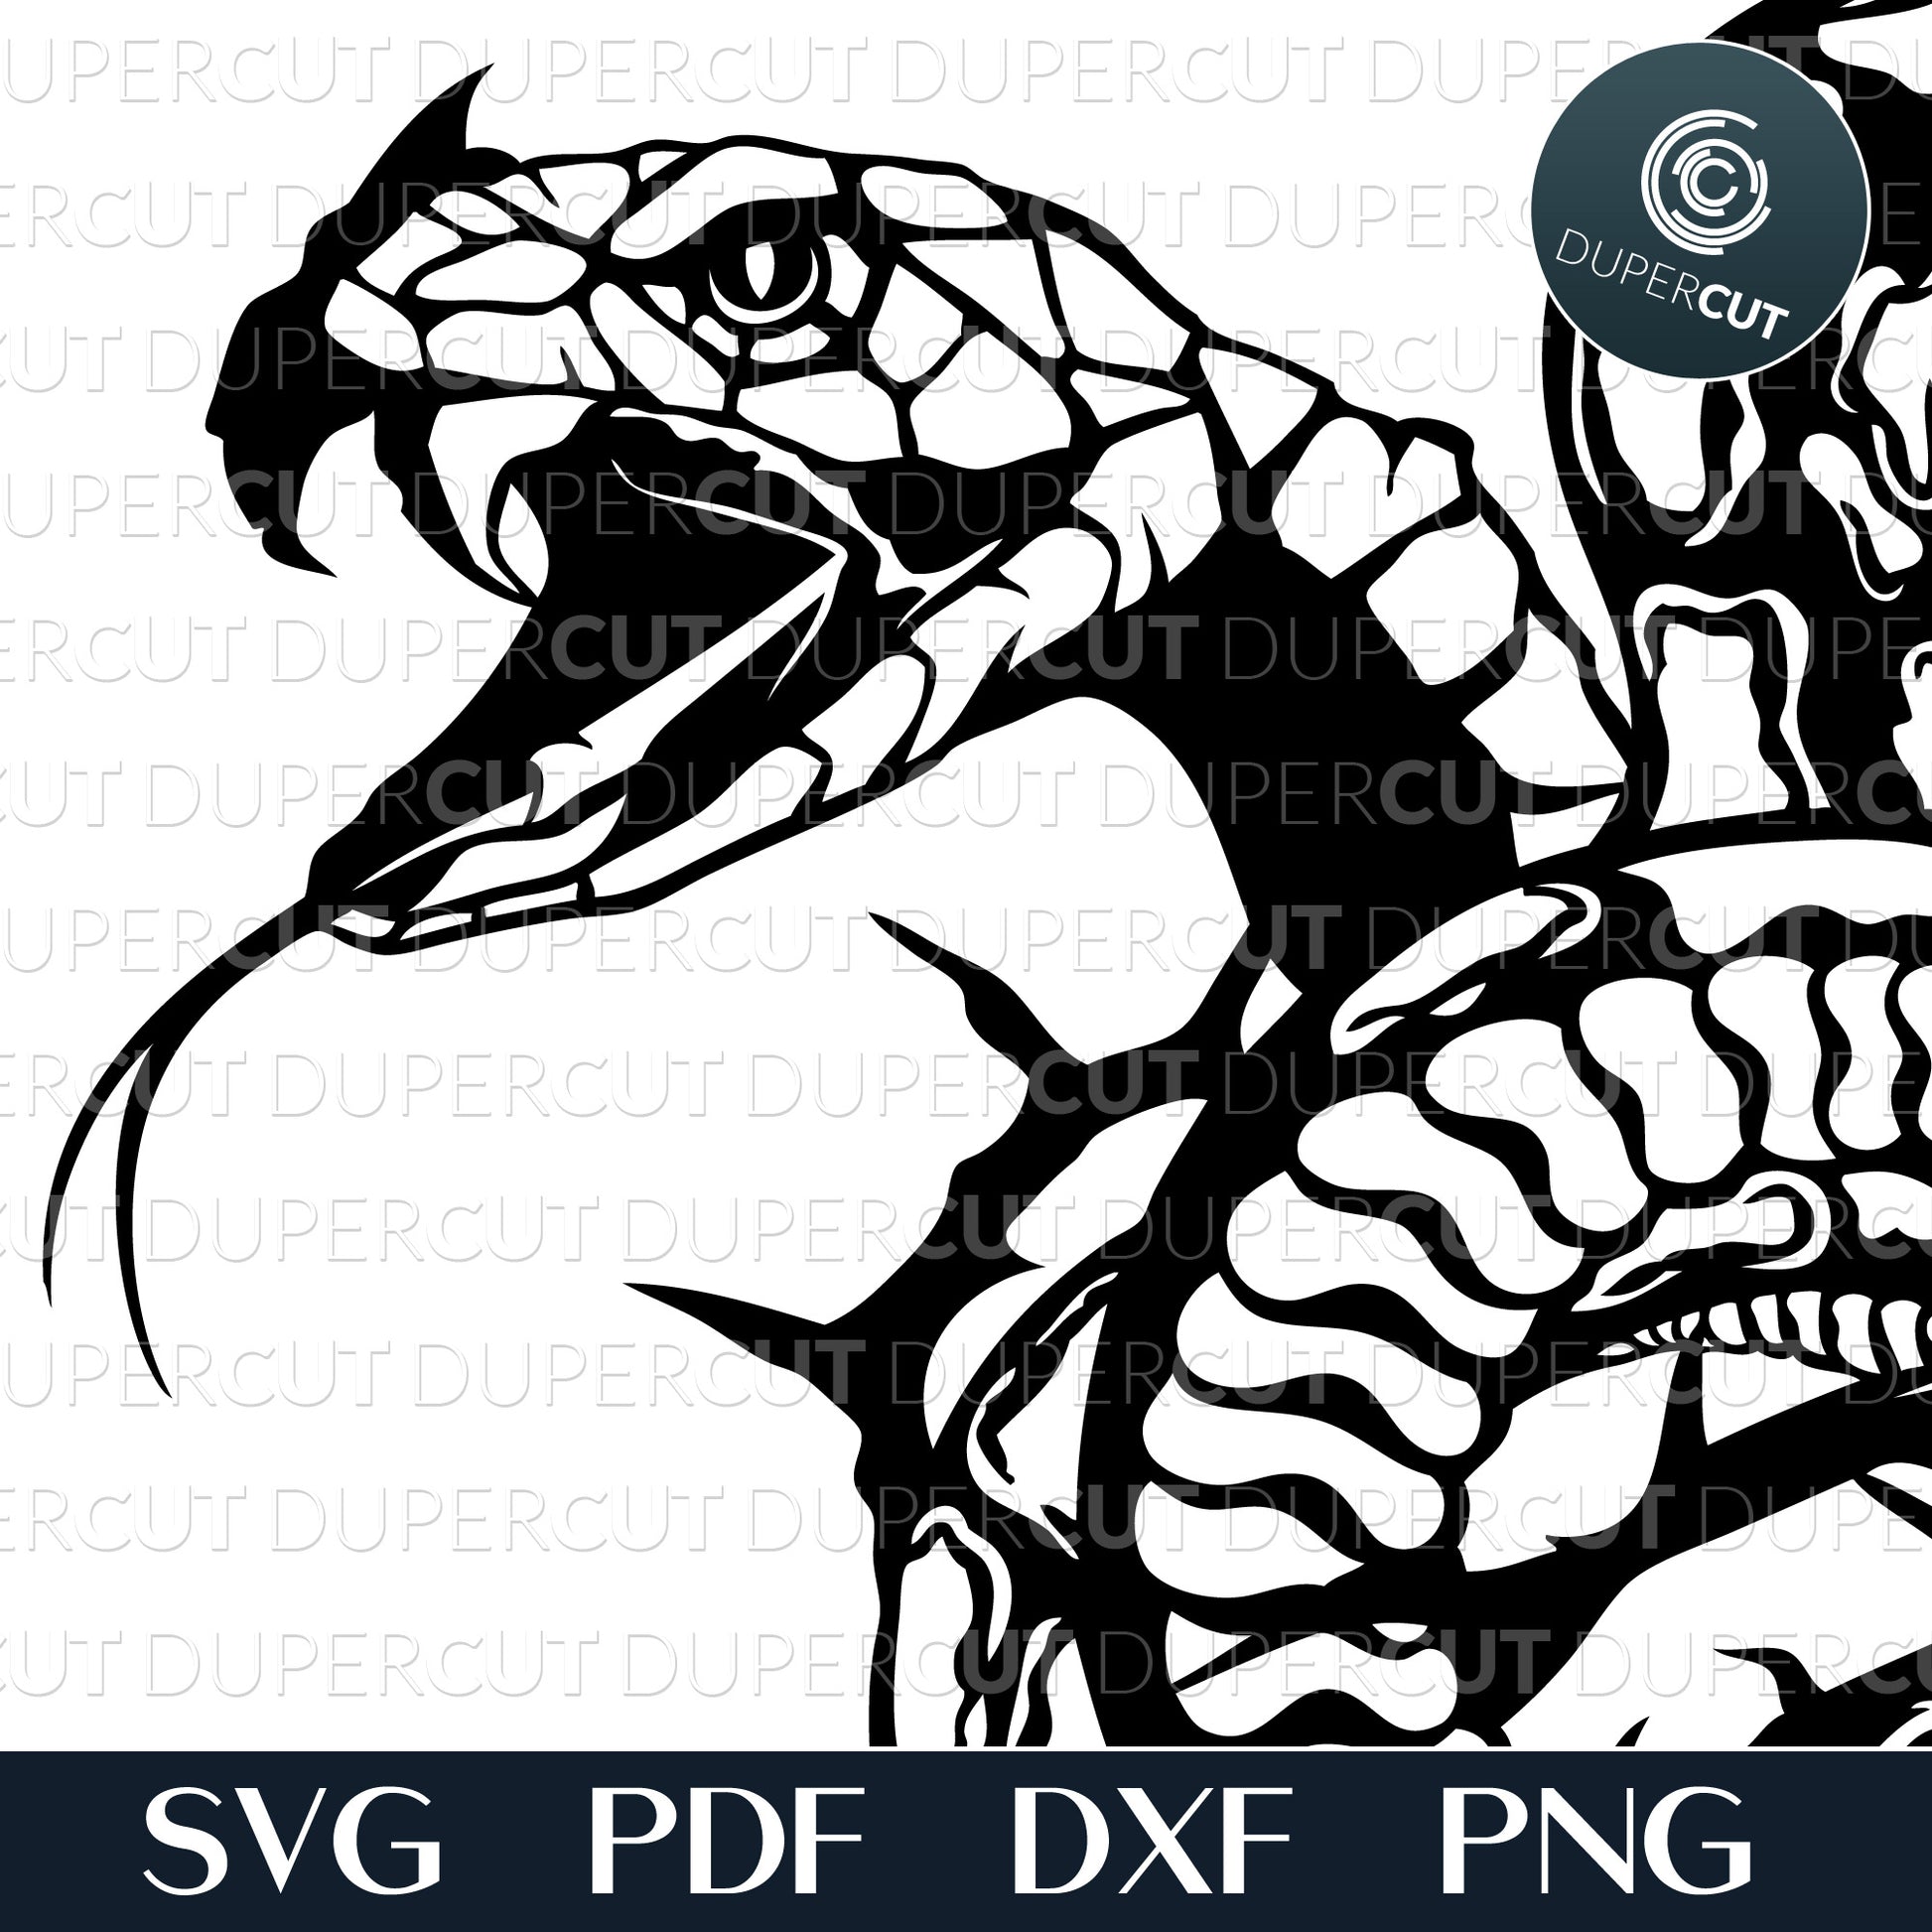 Steampunk snake. Line art tattoo. Paper cutting template for commercial use. SVG files for Silhouette Cameo, Cricut, Glowforge, DXF for CNC, laser cutting, print on demand